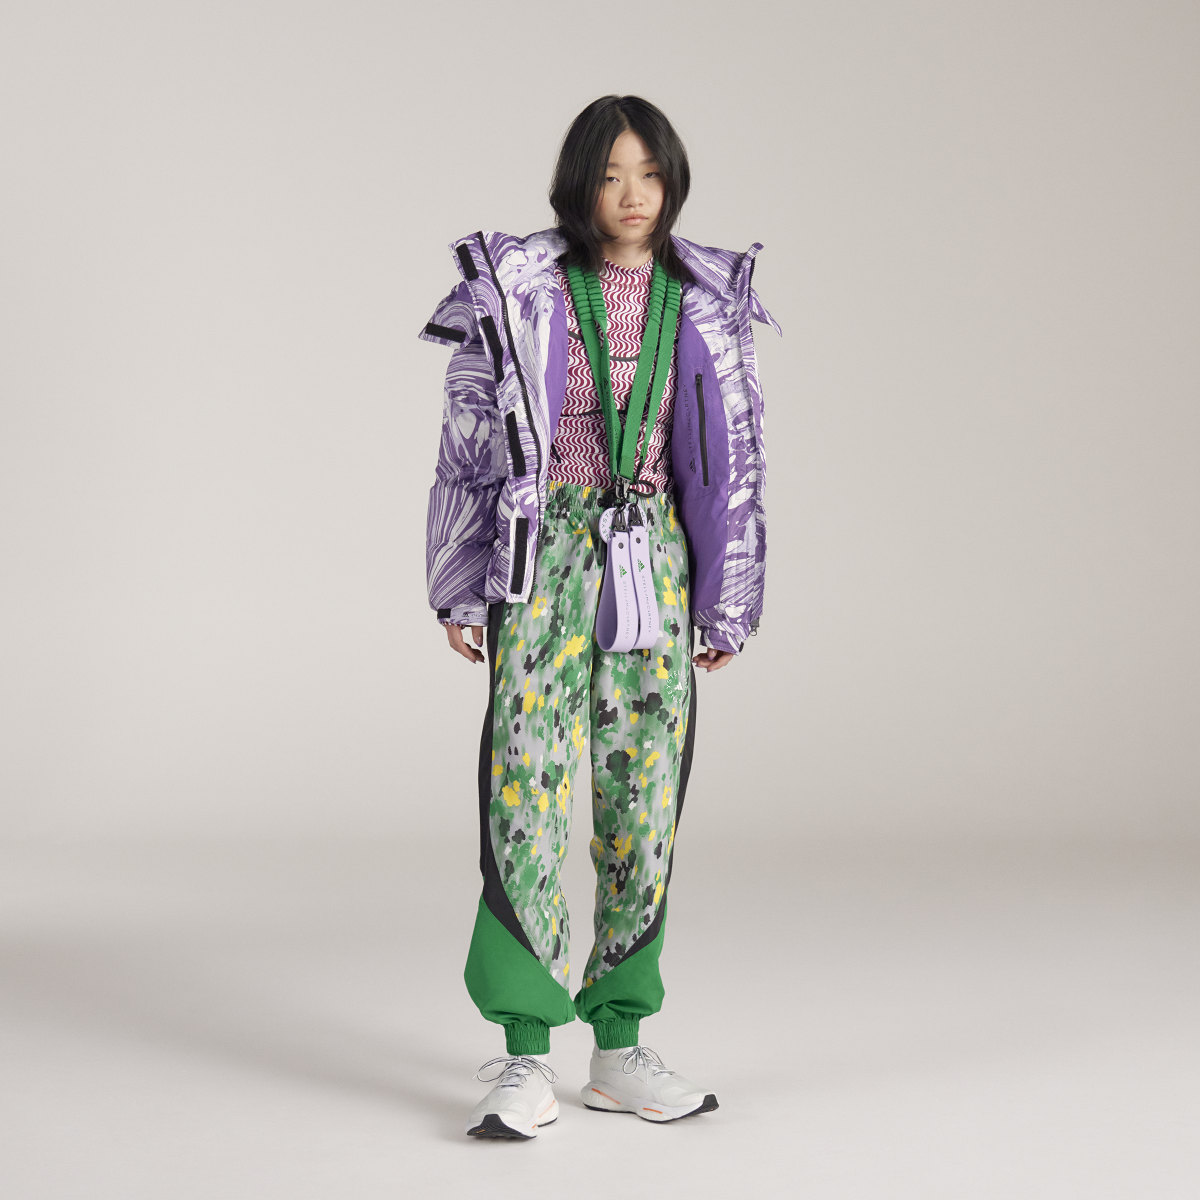 Adidas by Stella McCartney Printed Woven Tracksuit Bottoms. 9